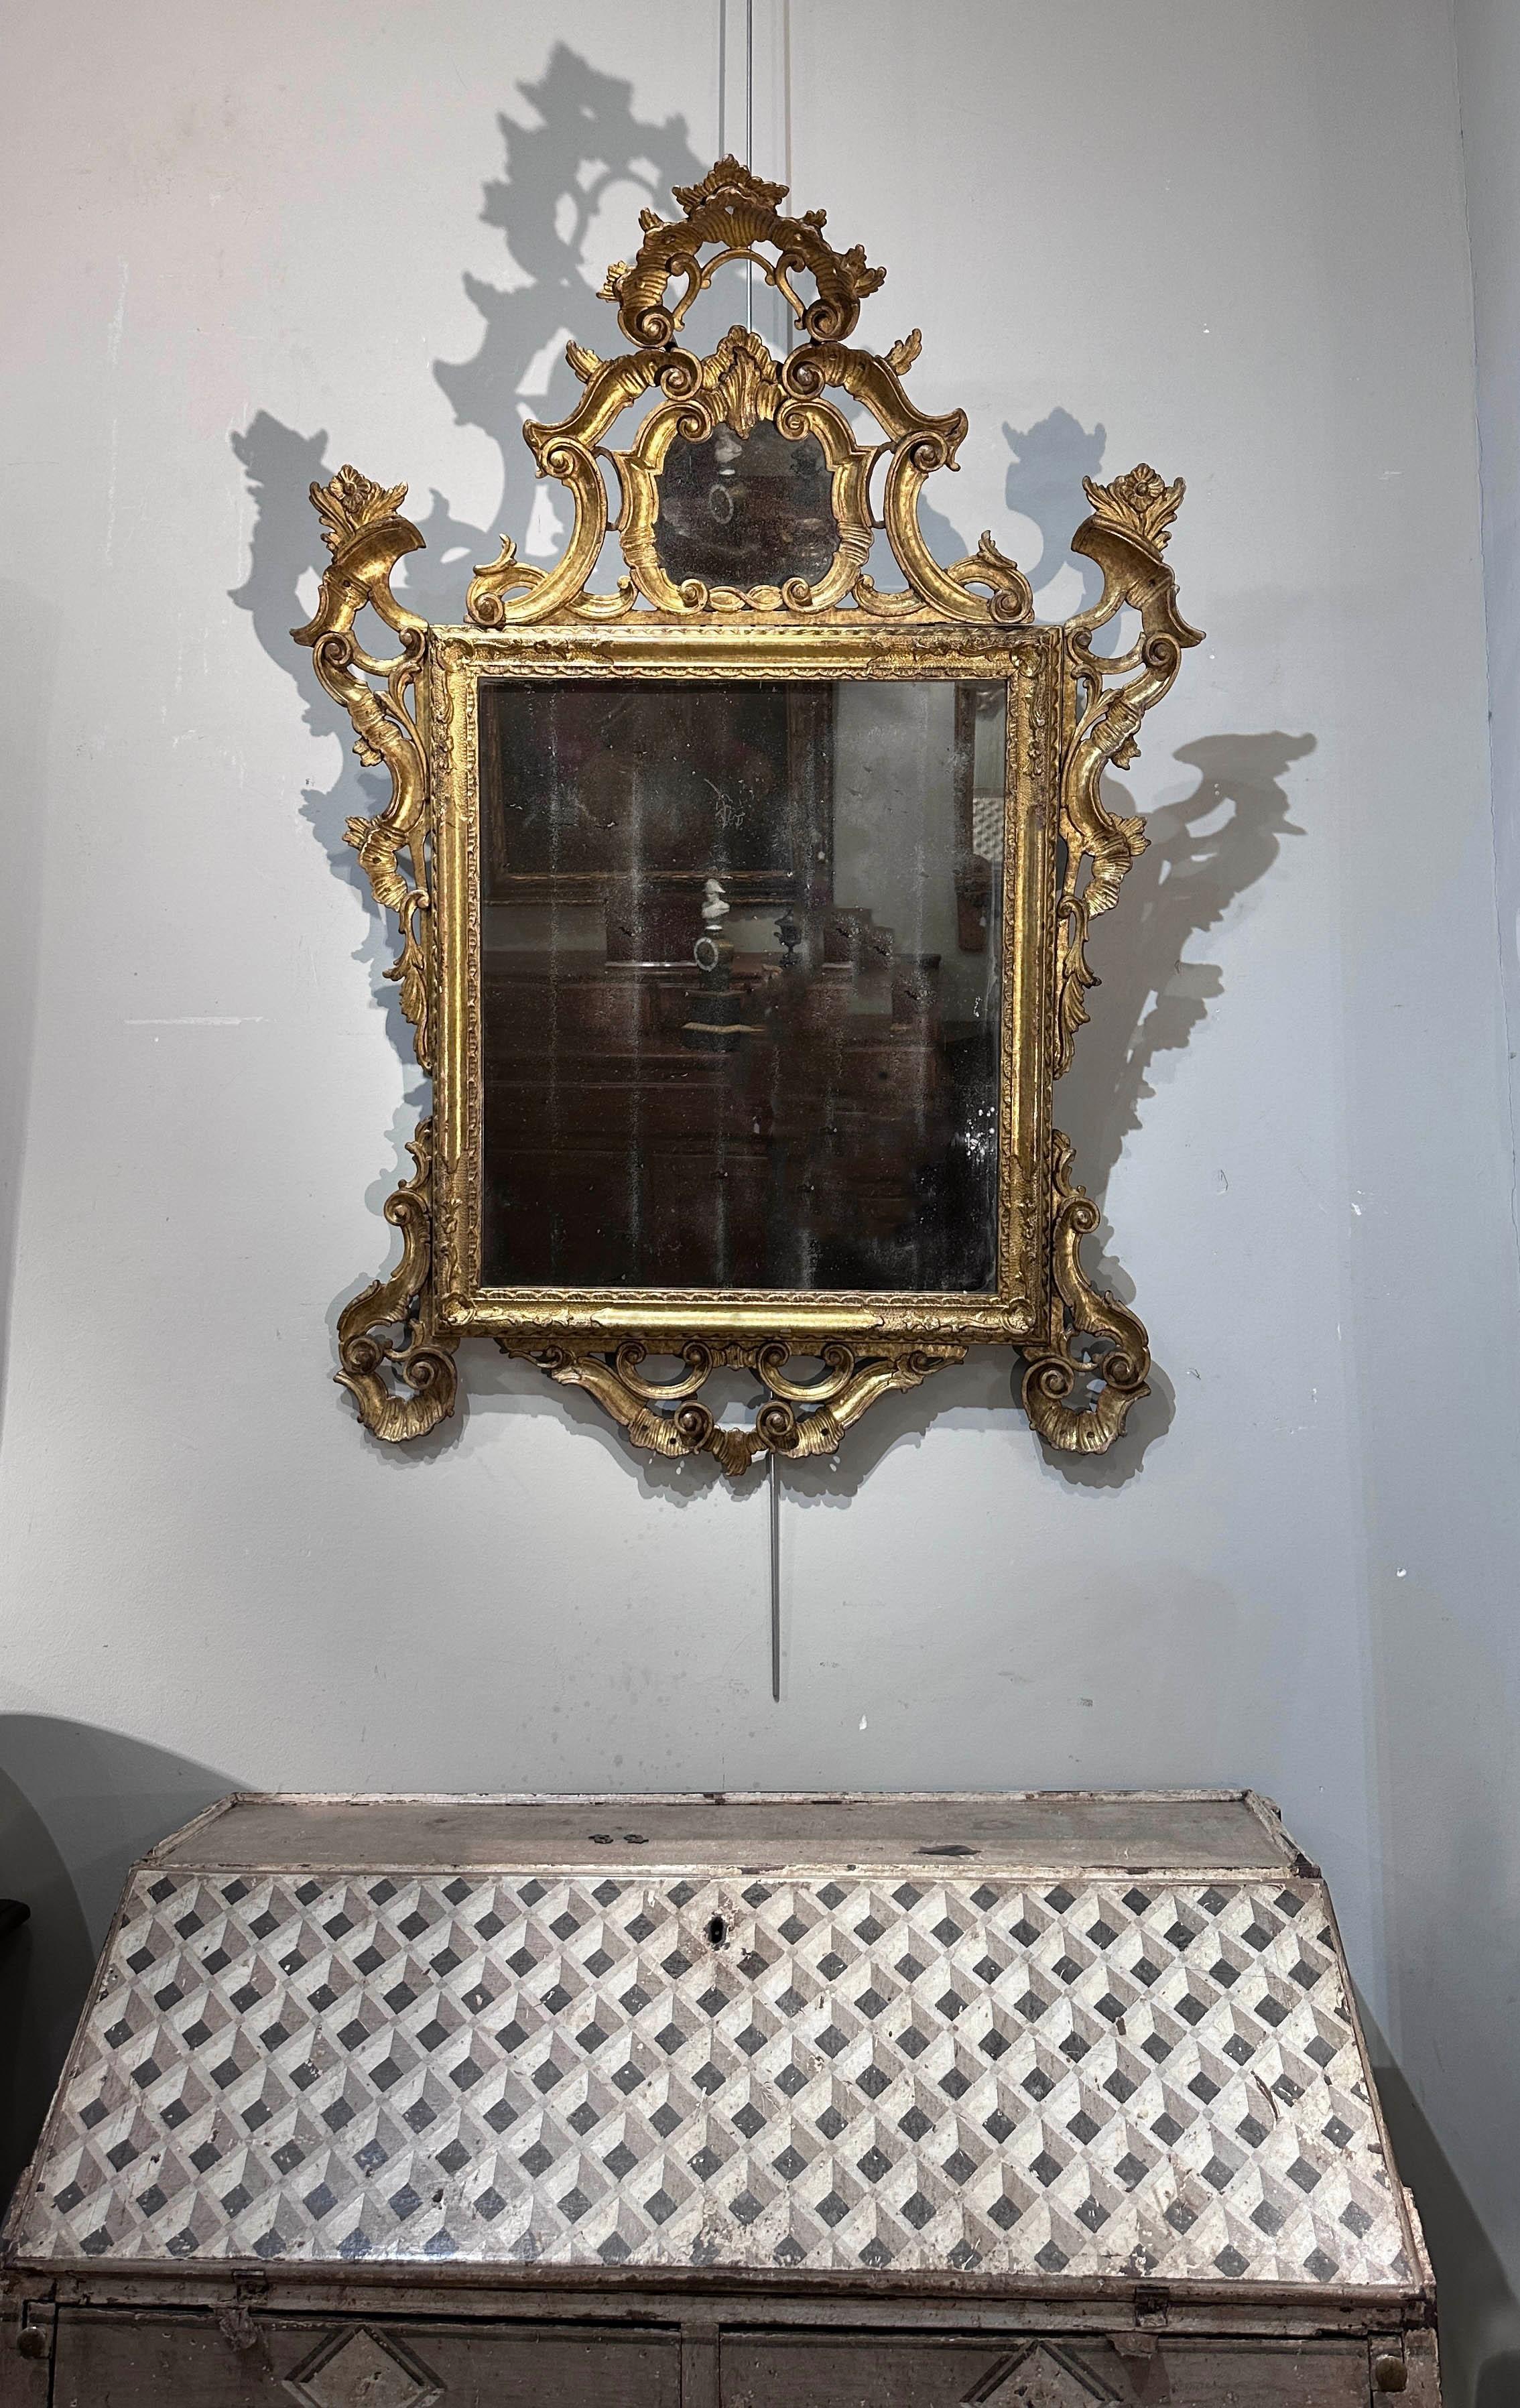 Splendid and refined mirror in carved pine wood and gilded with pure gold leaf. The frame features intricate patterns and floral curls that lend a touch of elegance and sophistication. The lights are original and a mirror panel adds further beauty